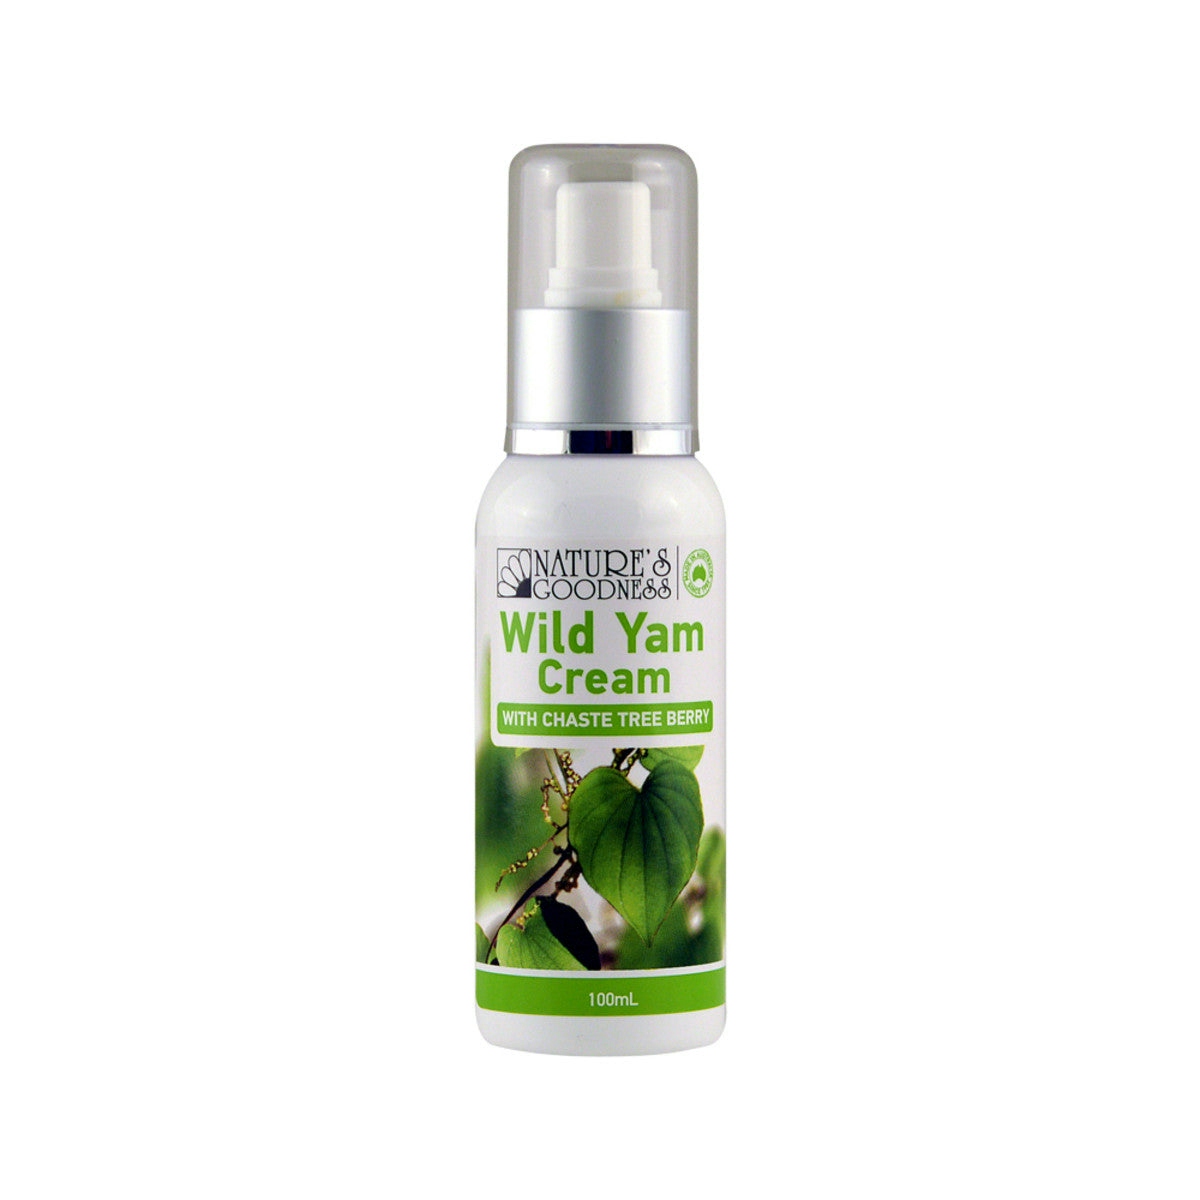 image of Nature's Goodness Wild Yam Cream (with Chaste Tree Berry) 100ml on white background 